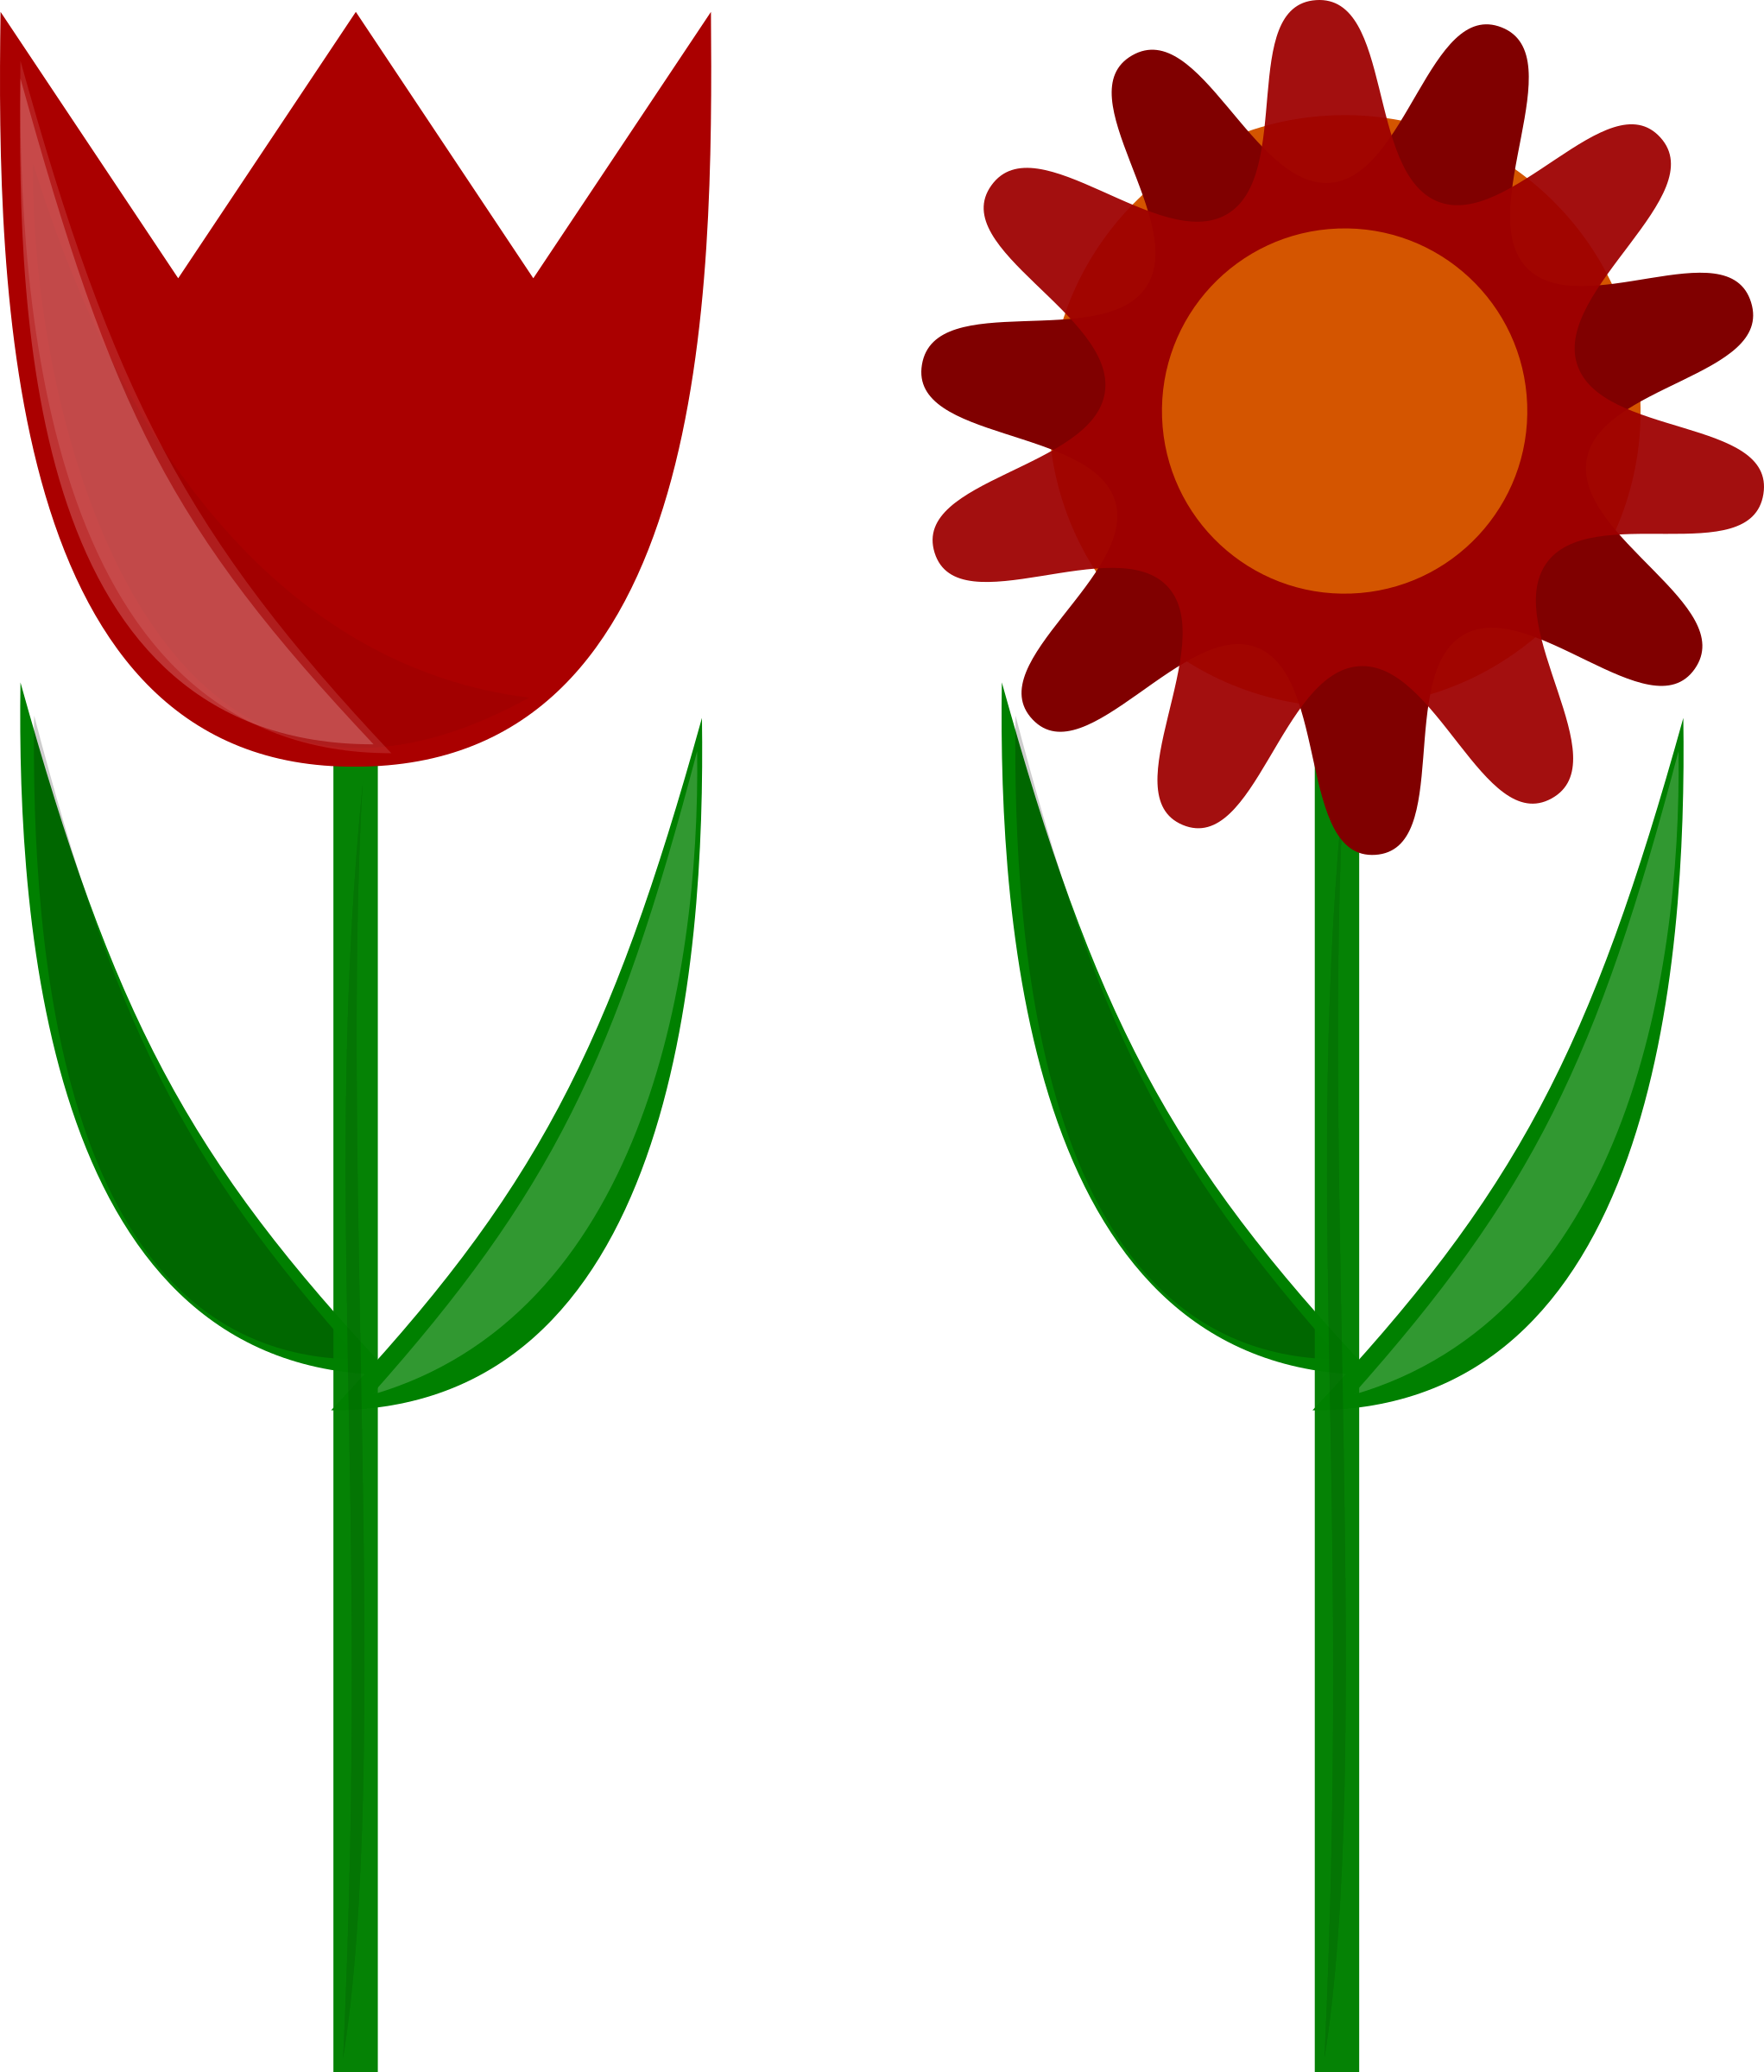 Big image png. Clipart flowers tulip